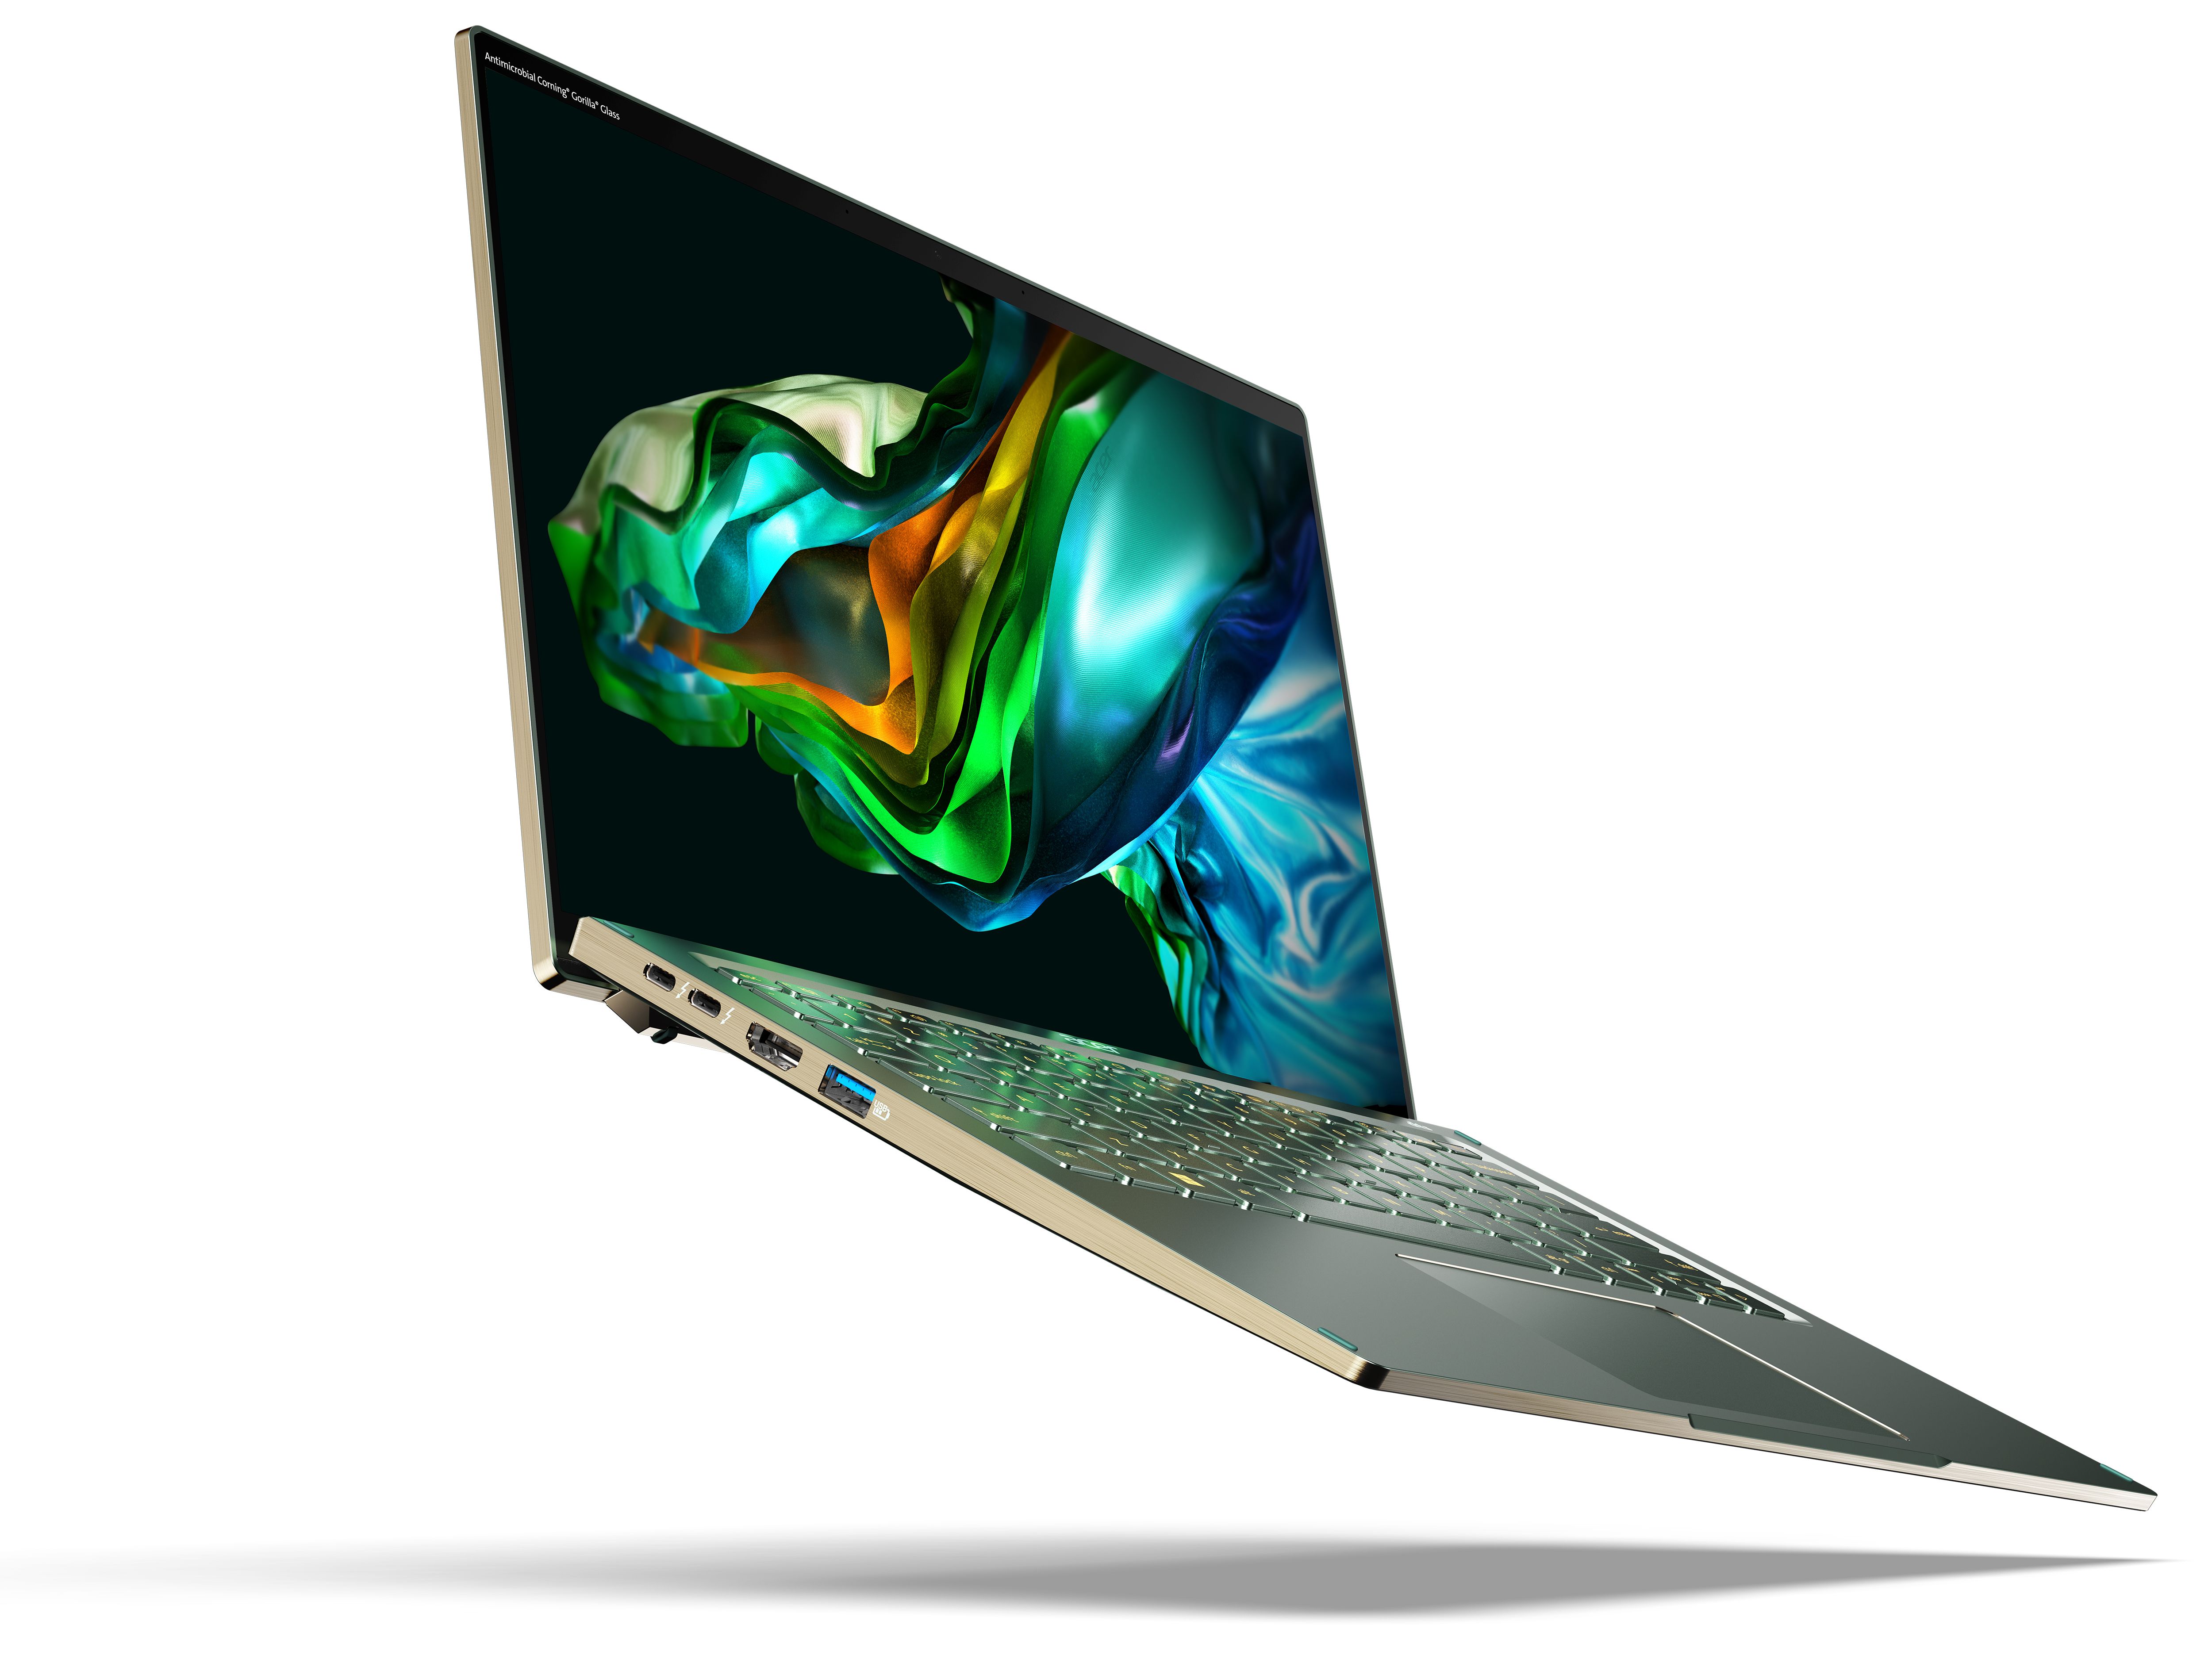 The new Acer Swift Go laptops feature 13th Gen Intel processors and